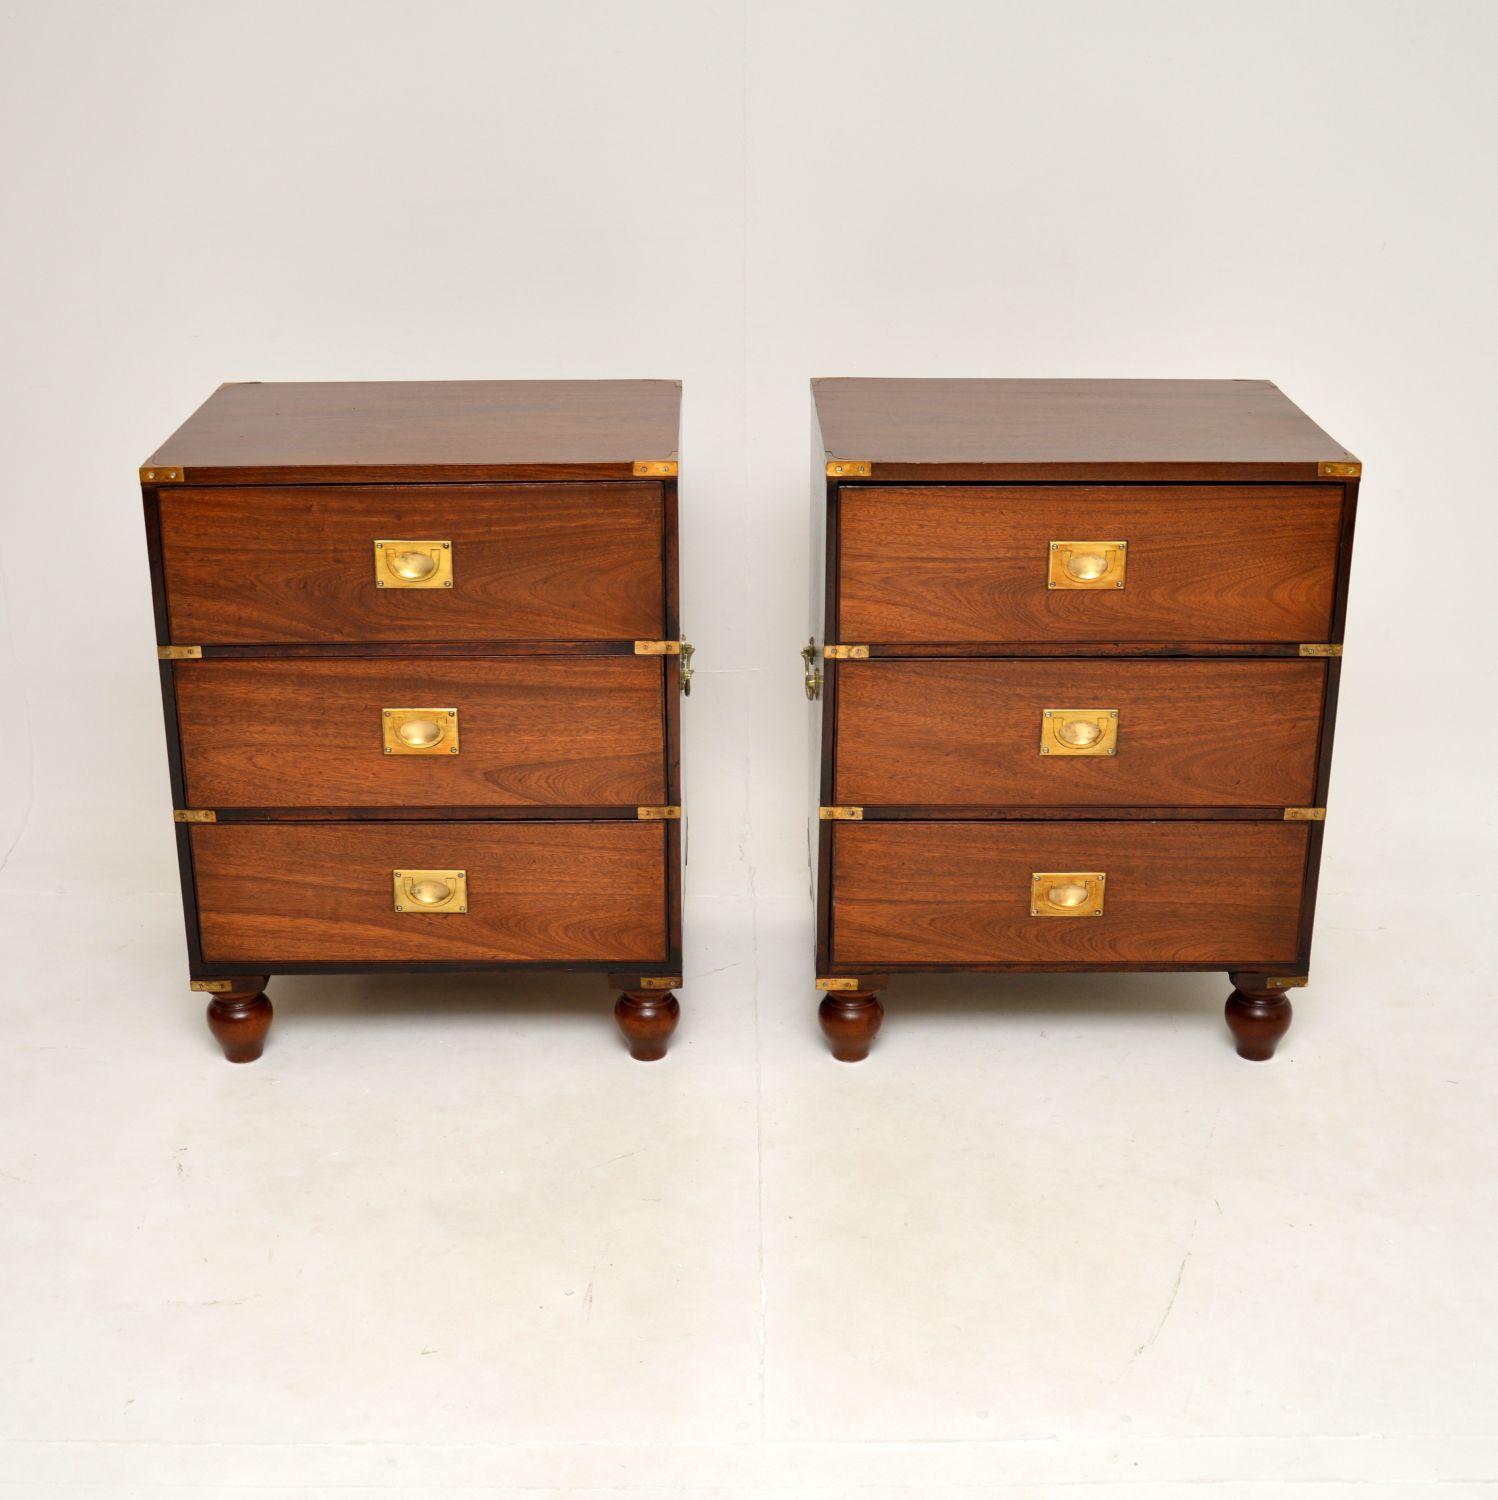 A fantastic pair of antique military campaign bedside chests. They were made in England, they date from around the 1900-1920 period.

They are of superb quality with lots of storage space, they are a large, impressive and useful size. The wood has a